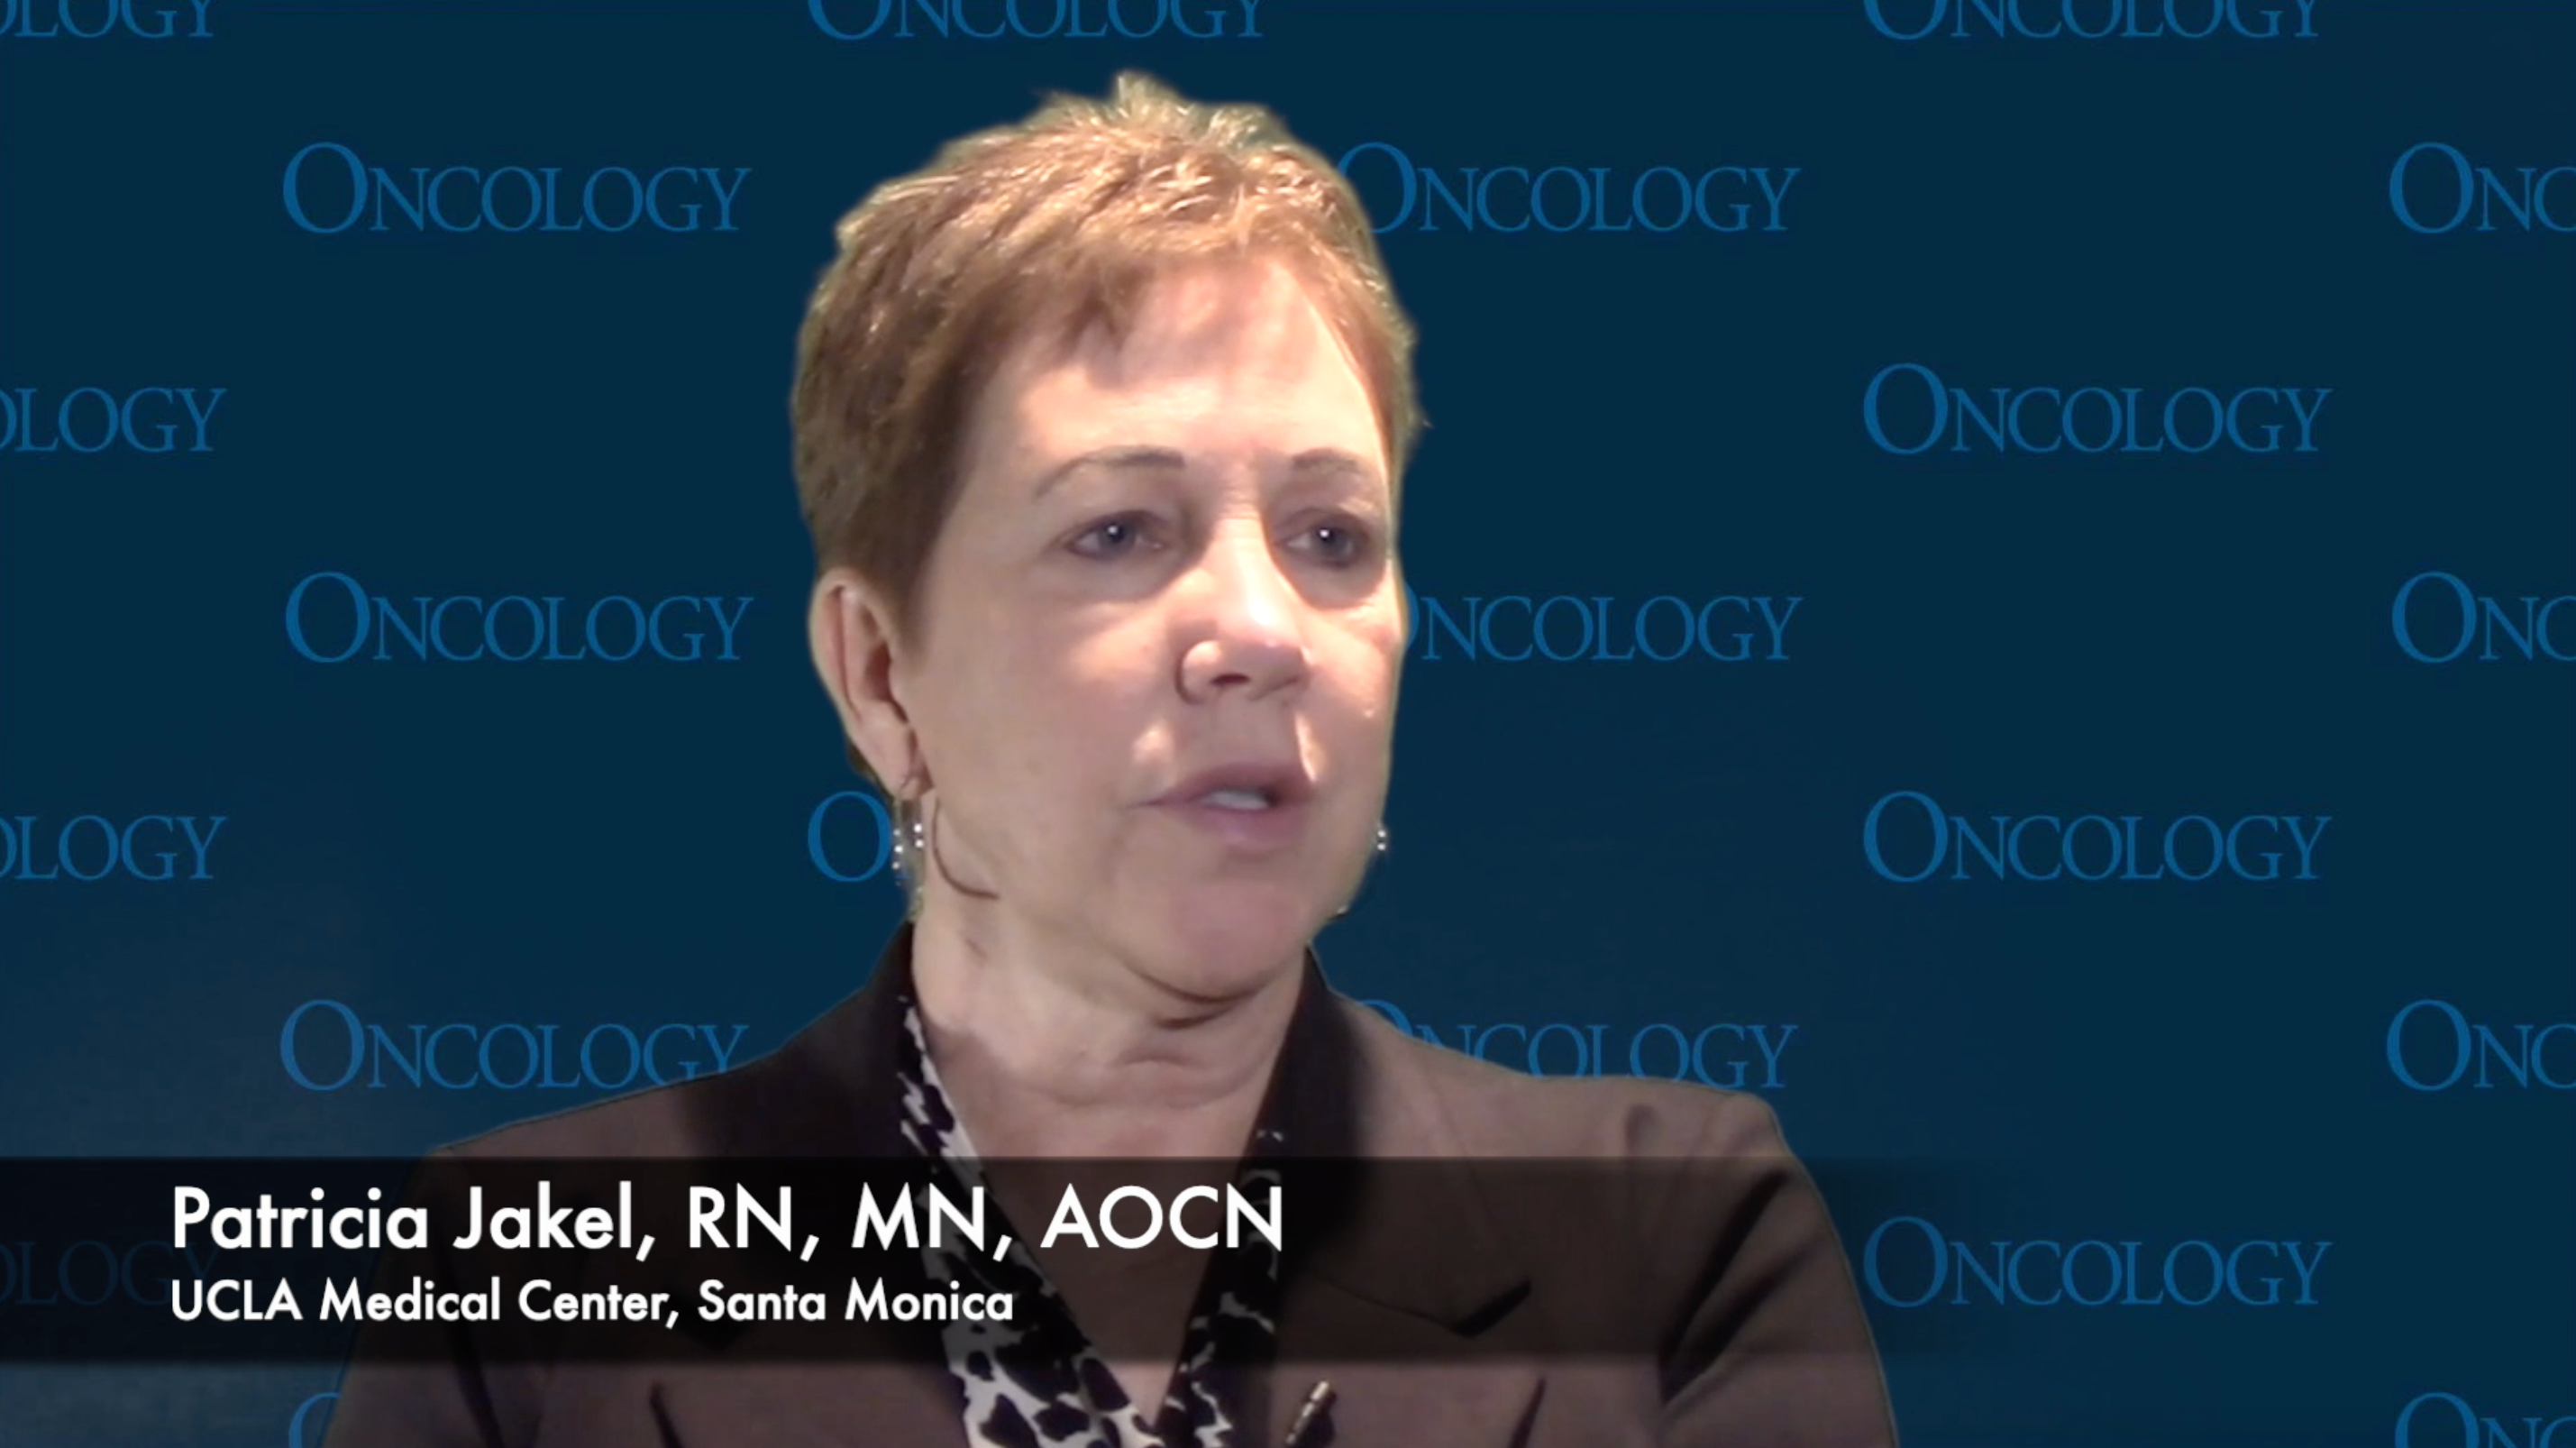 Patricia Jakel, RN, MN, AOCN, On Treating Patients with CDK 4/6 Inhibitors